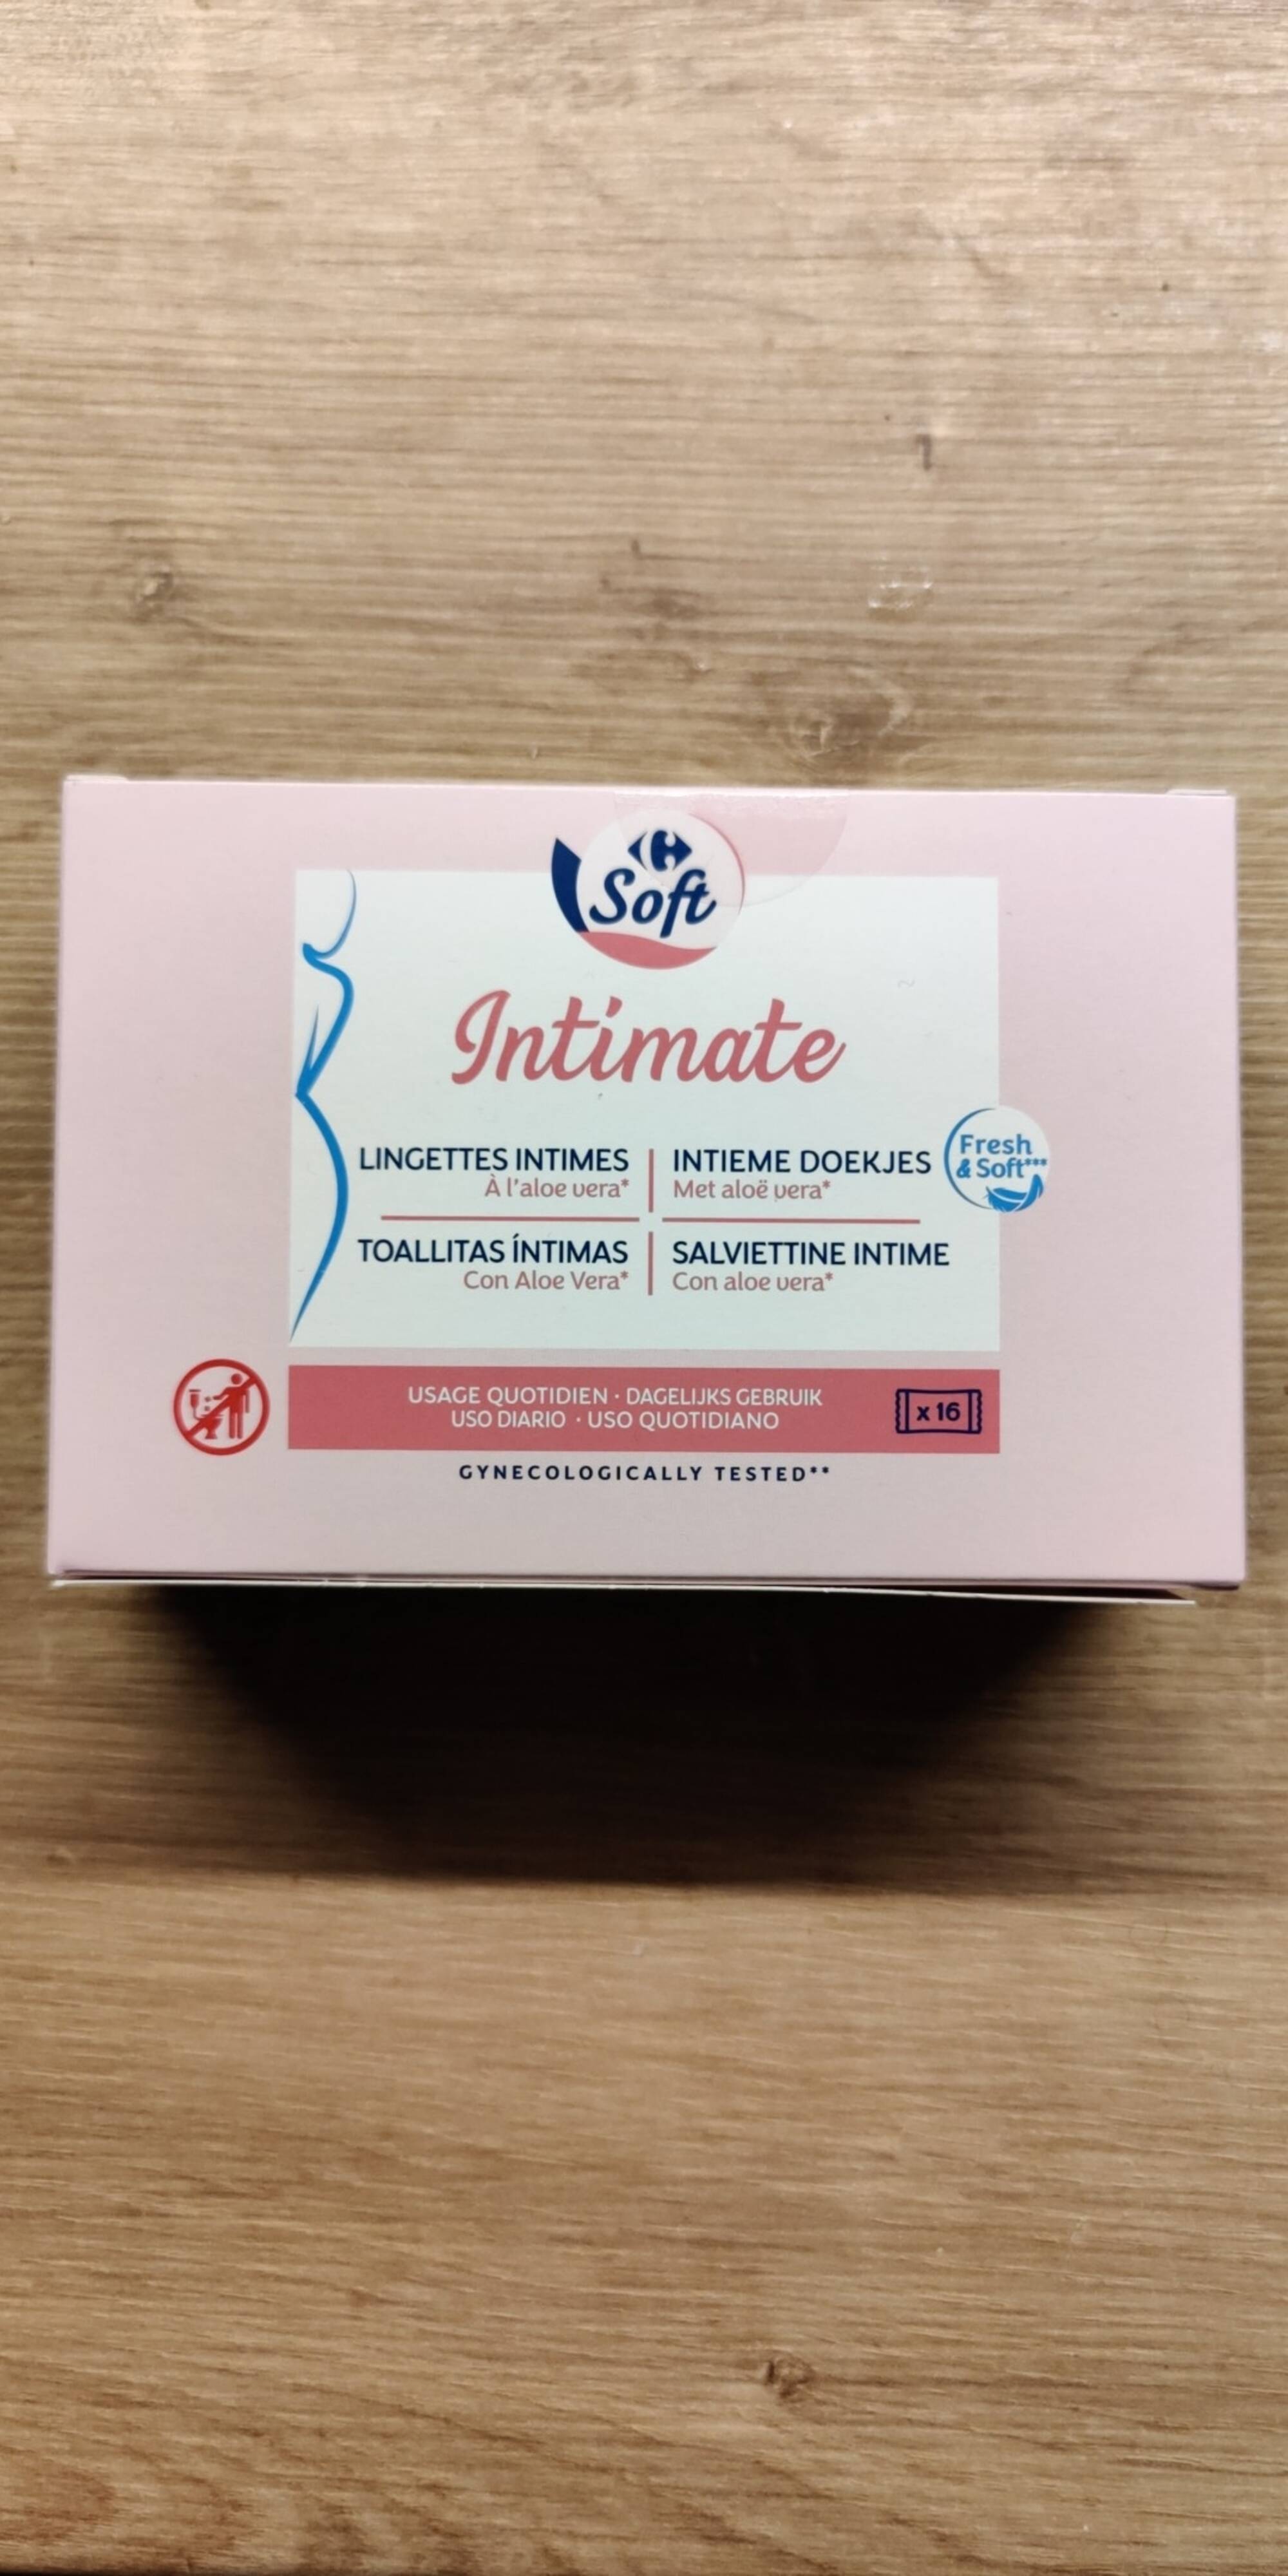 CARREFOUR SOFT - Intimate - Lingettes intimes